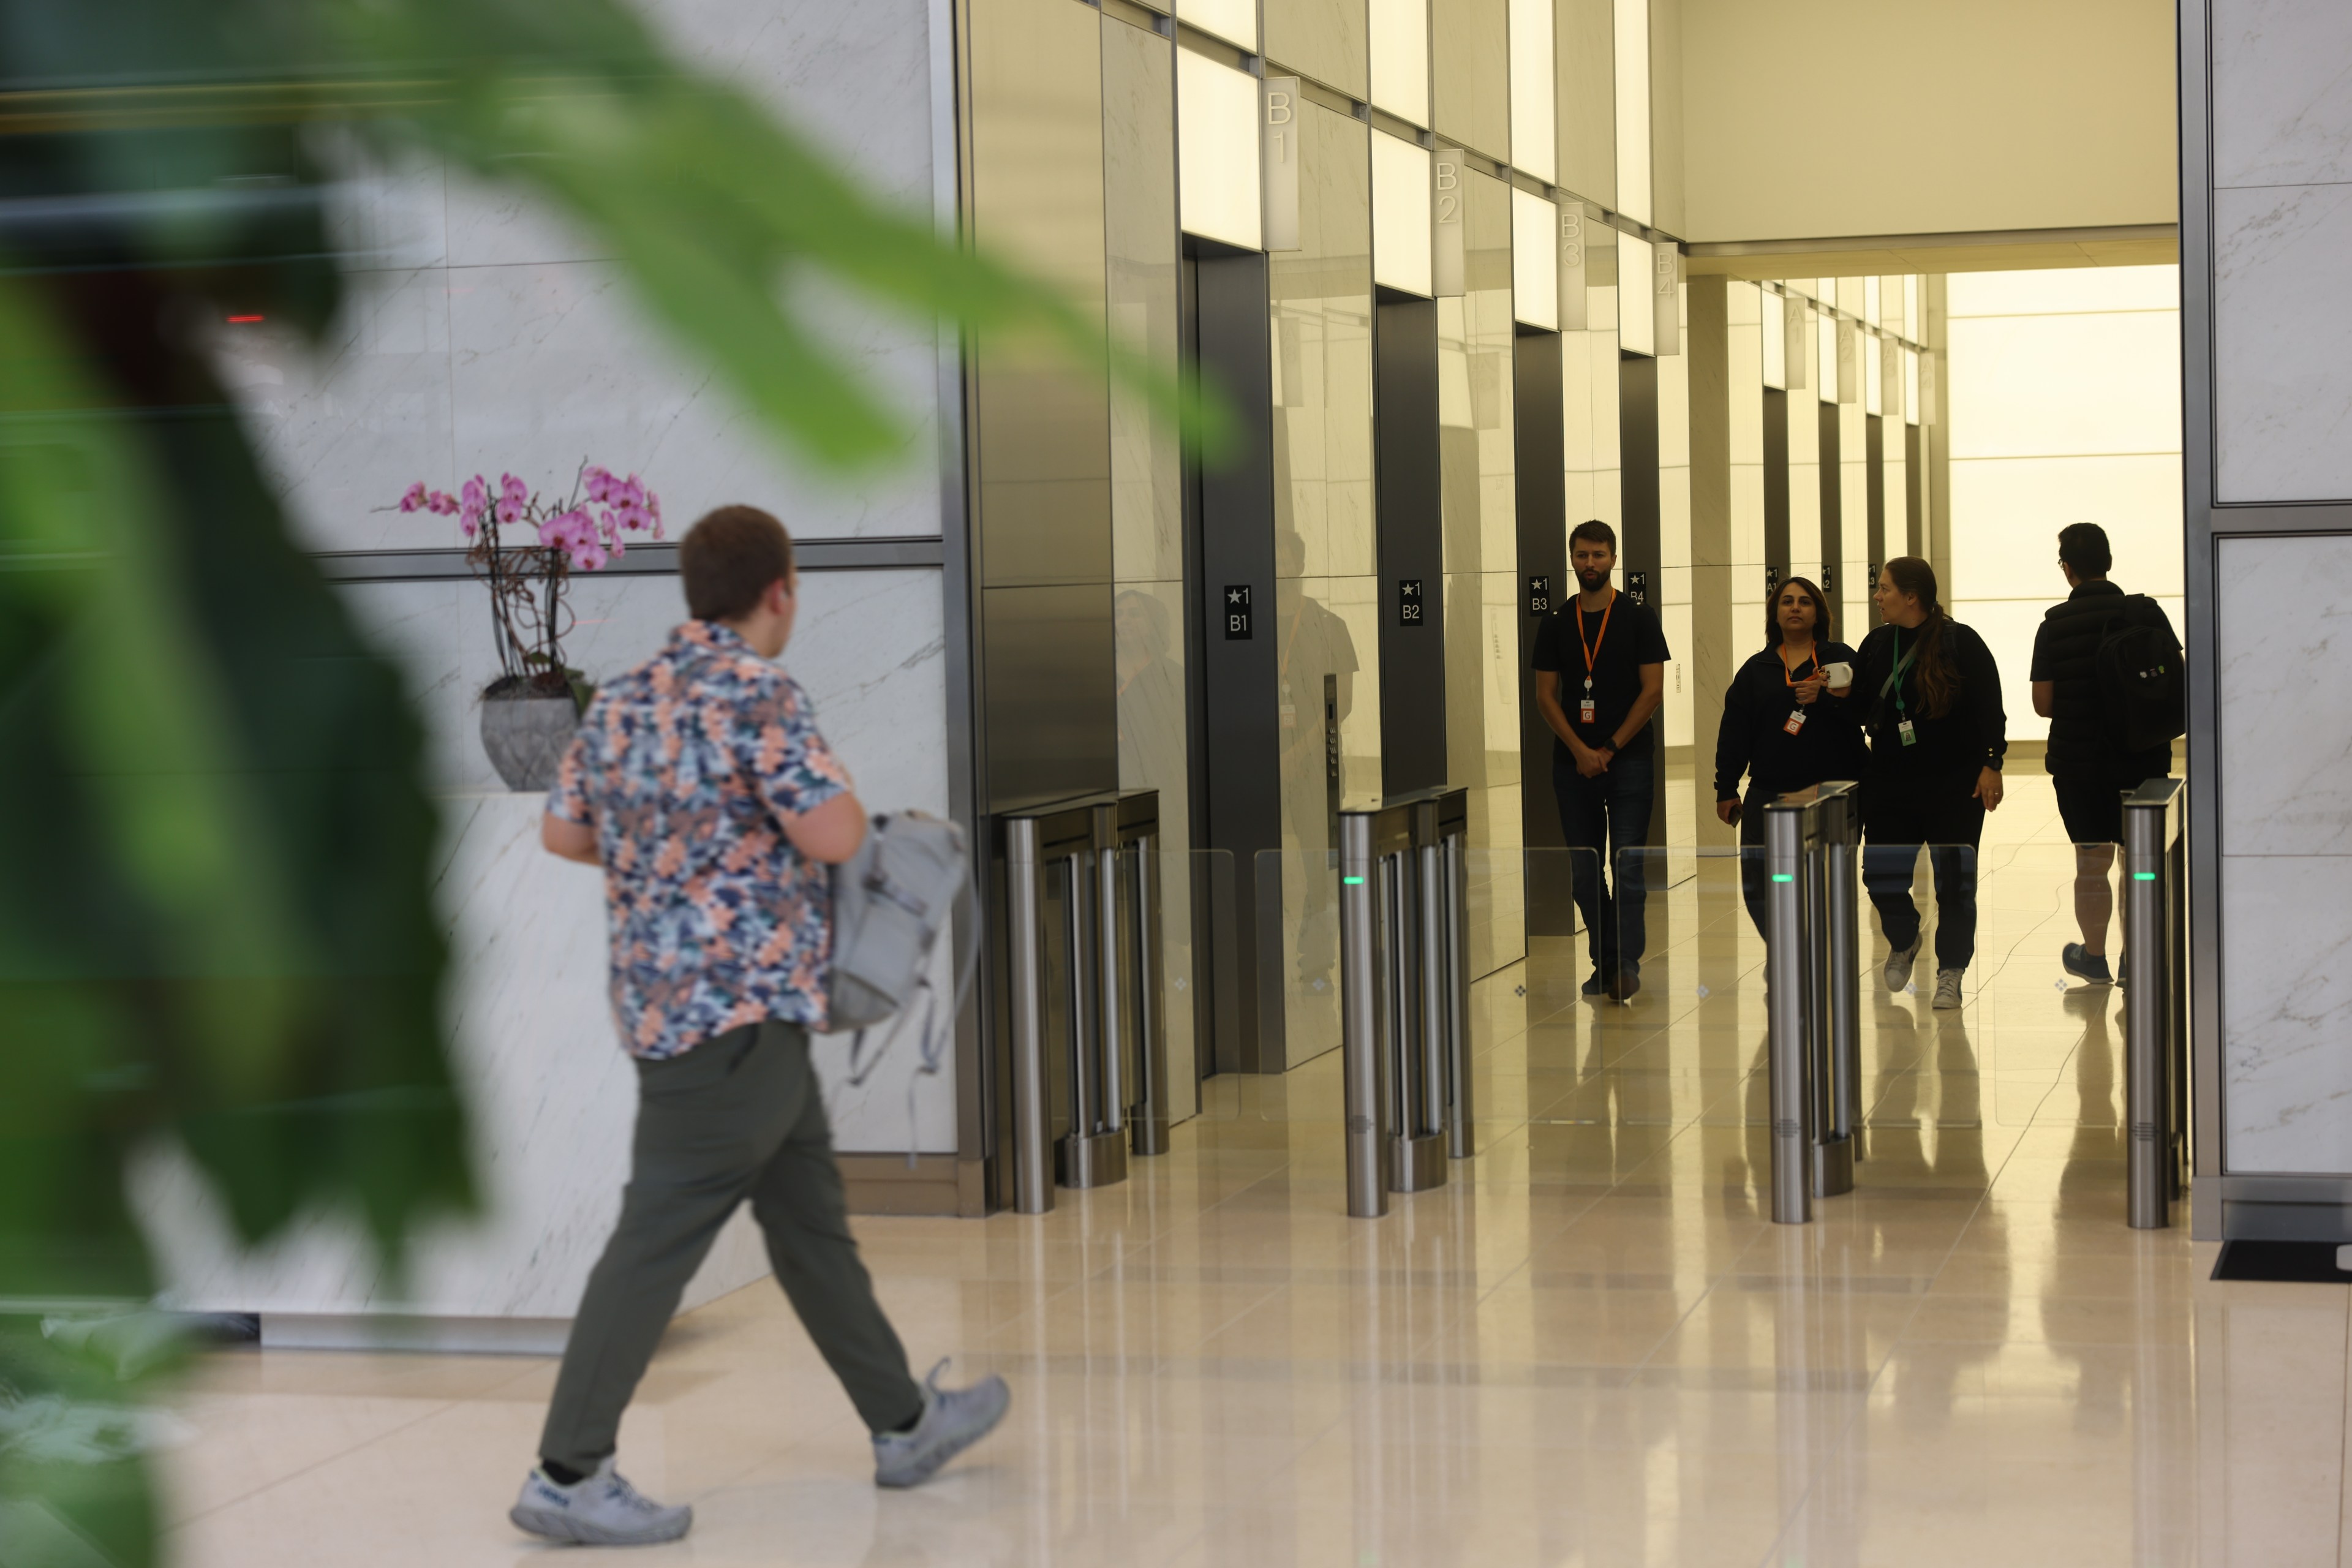 A man in a floral shirt walks towards a bank of elevators, while four other people stand or walk near the elevators in a modern, well-lit lobby with a large plant in the foreground.